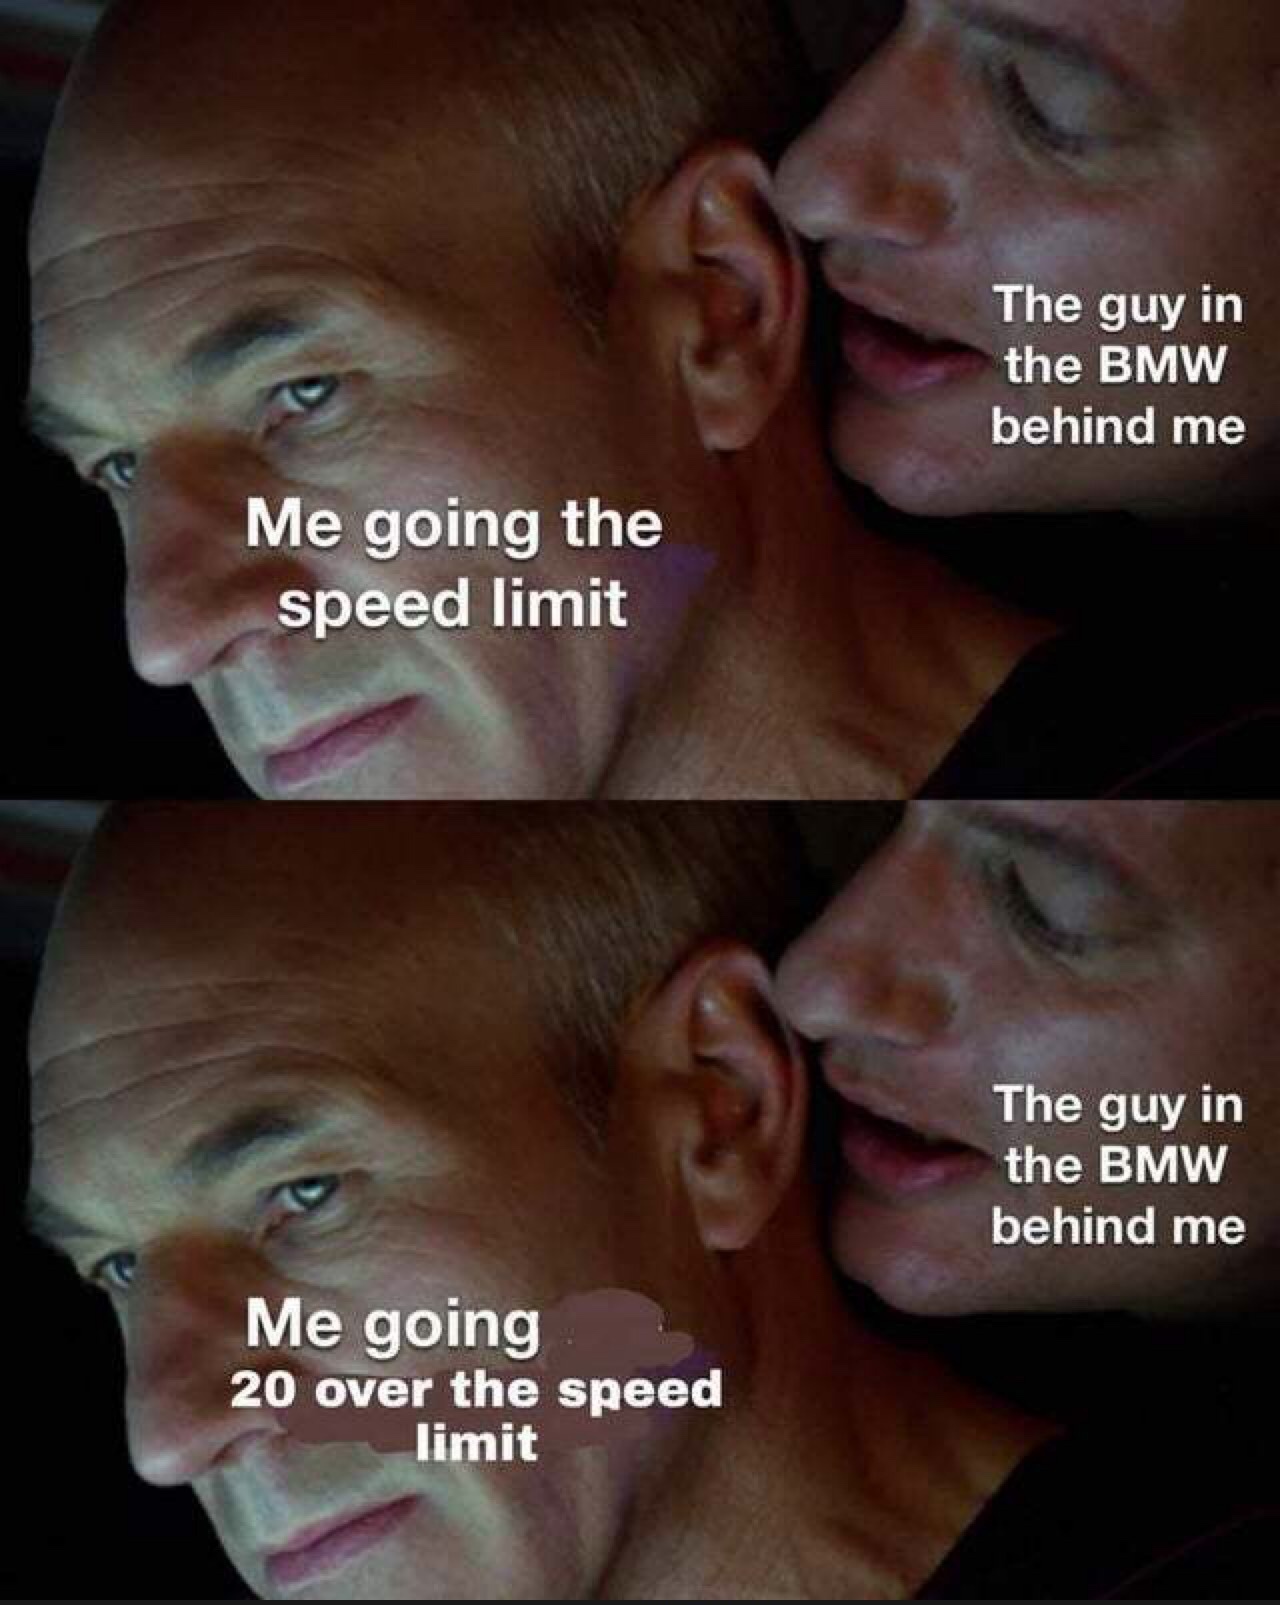 BMW People be zoomin sometimes tho - meme